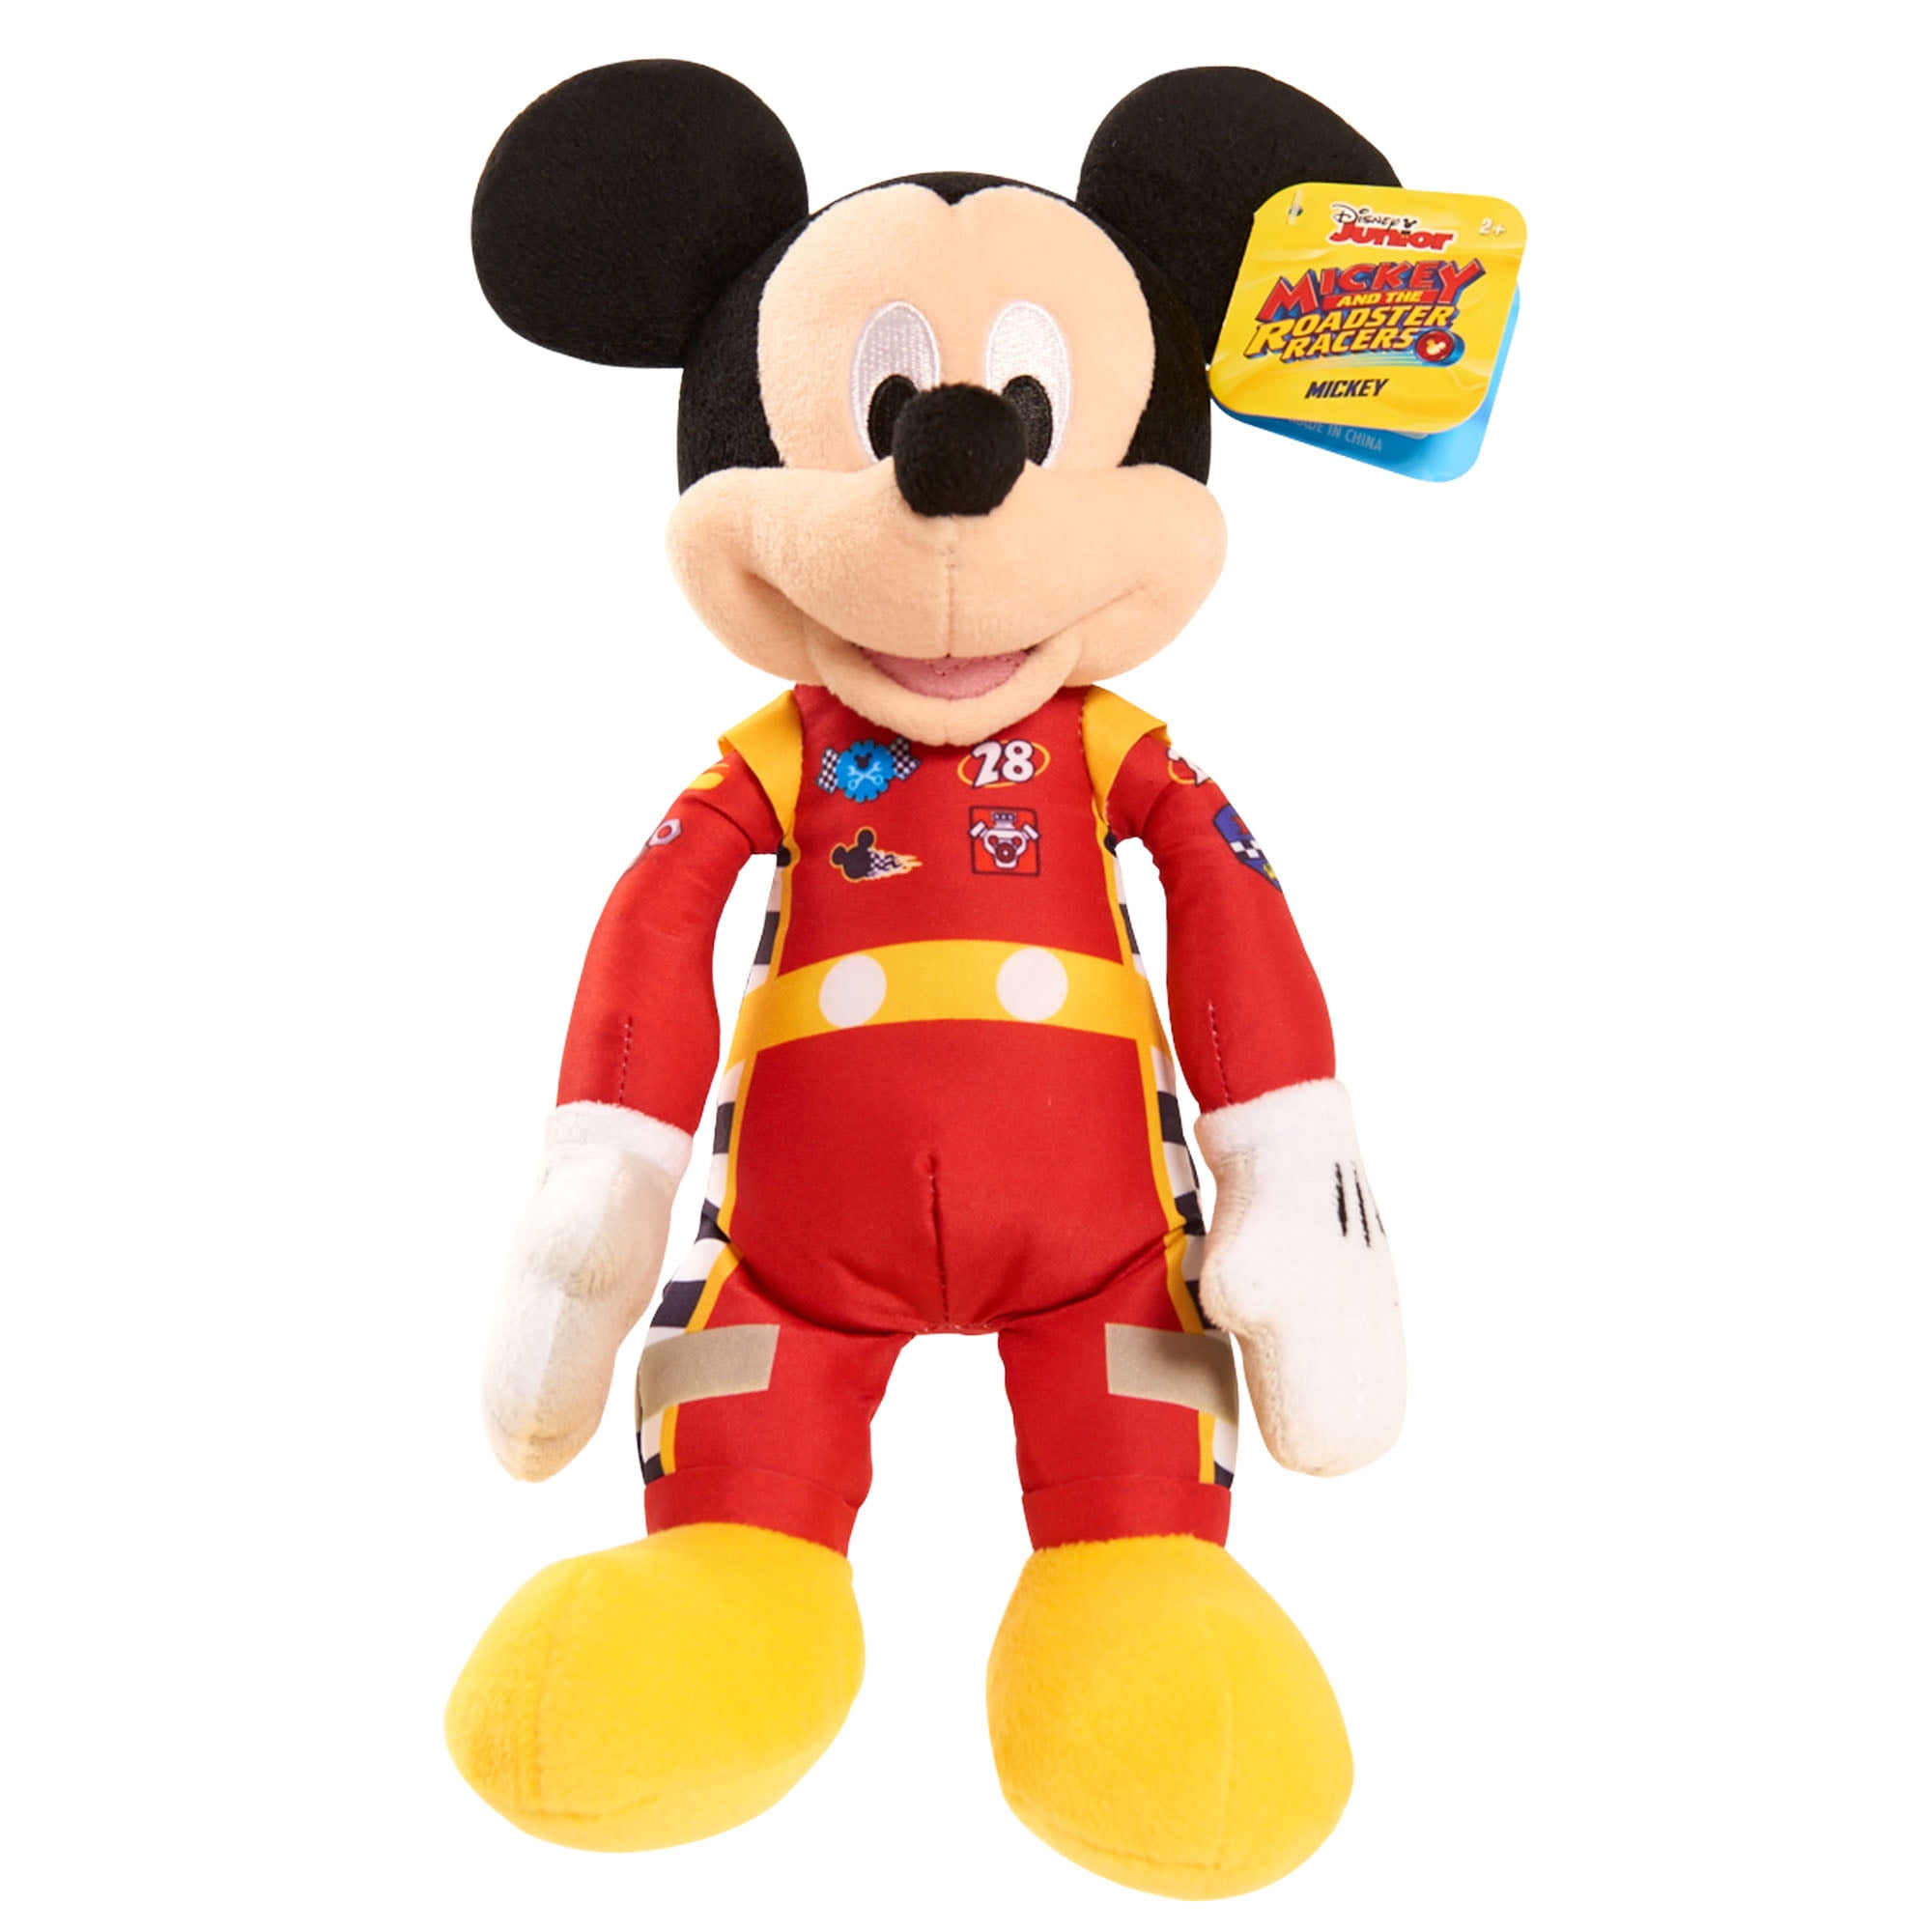 Original Licensed Disney Junior 8 inch Mickey and the Roadster Racers plush toys 